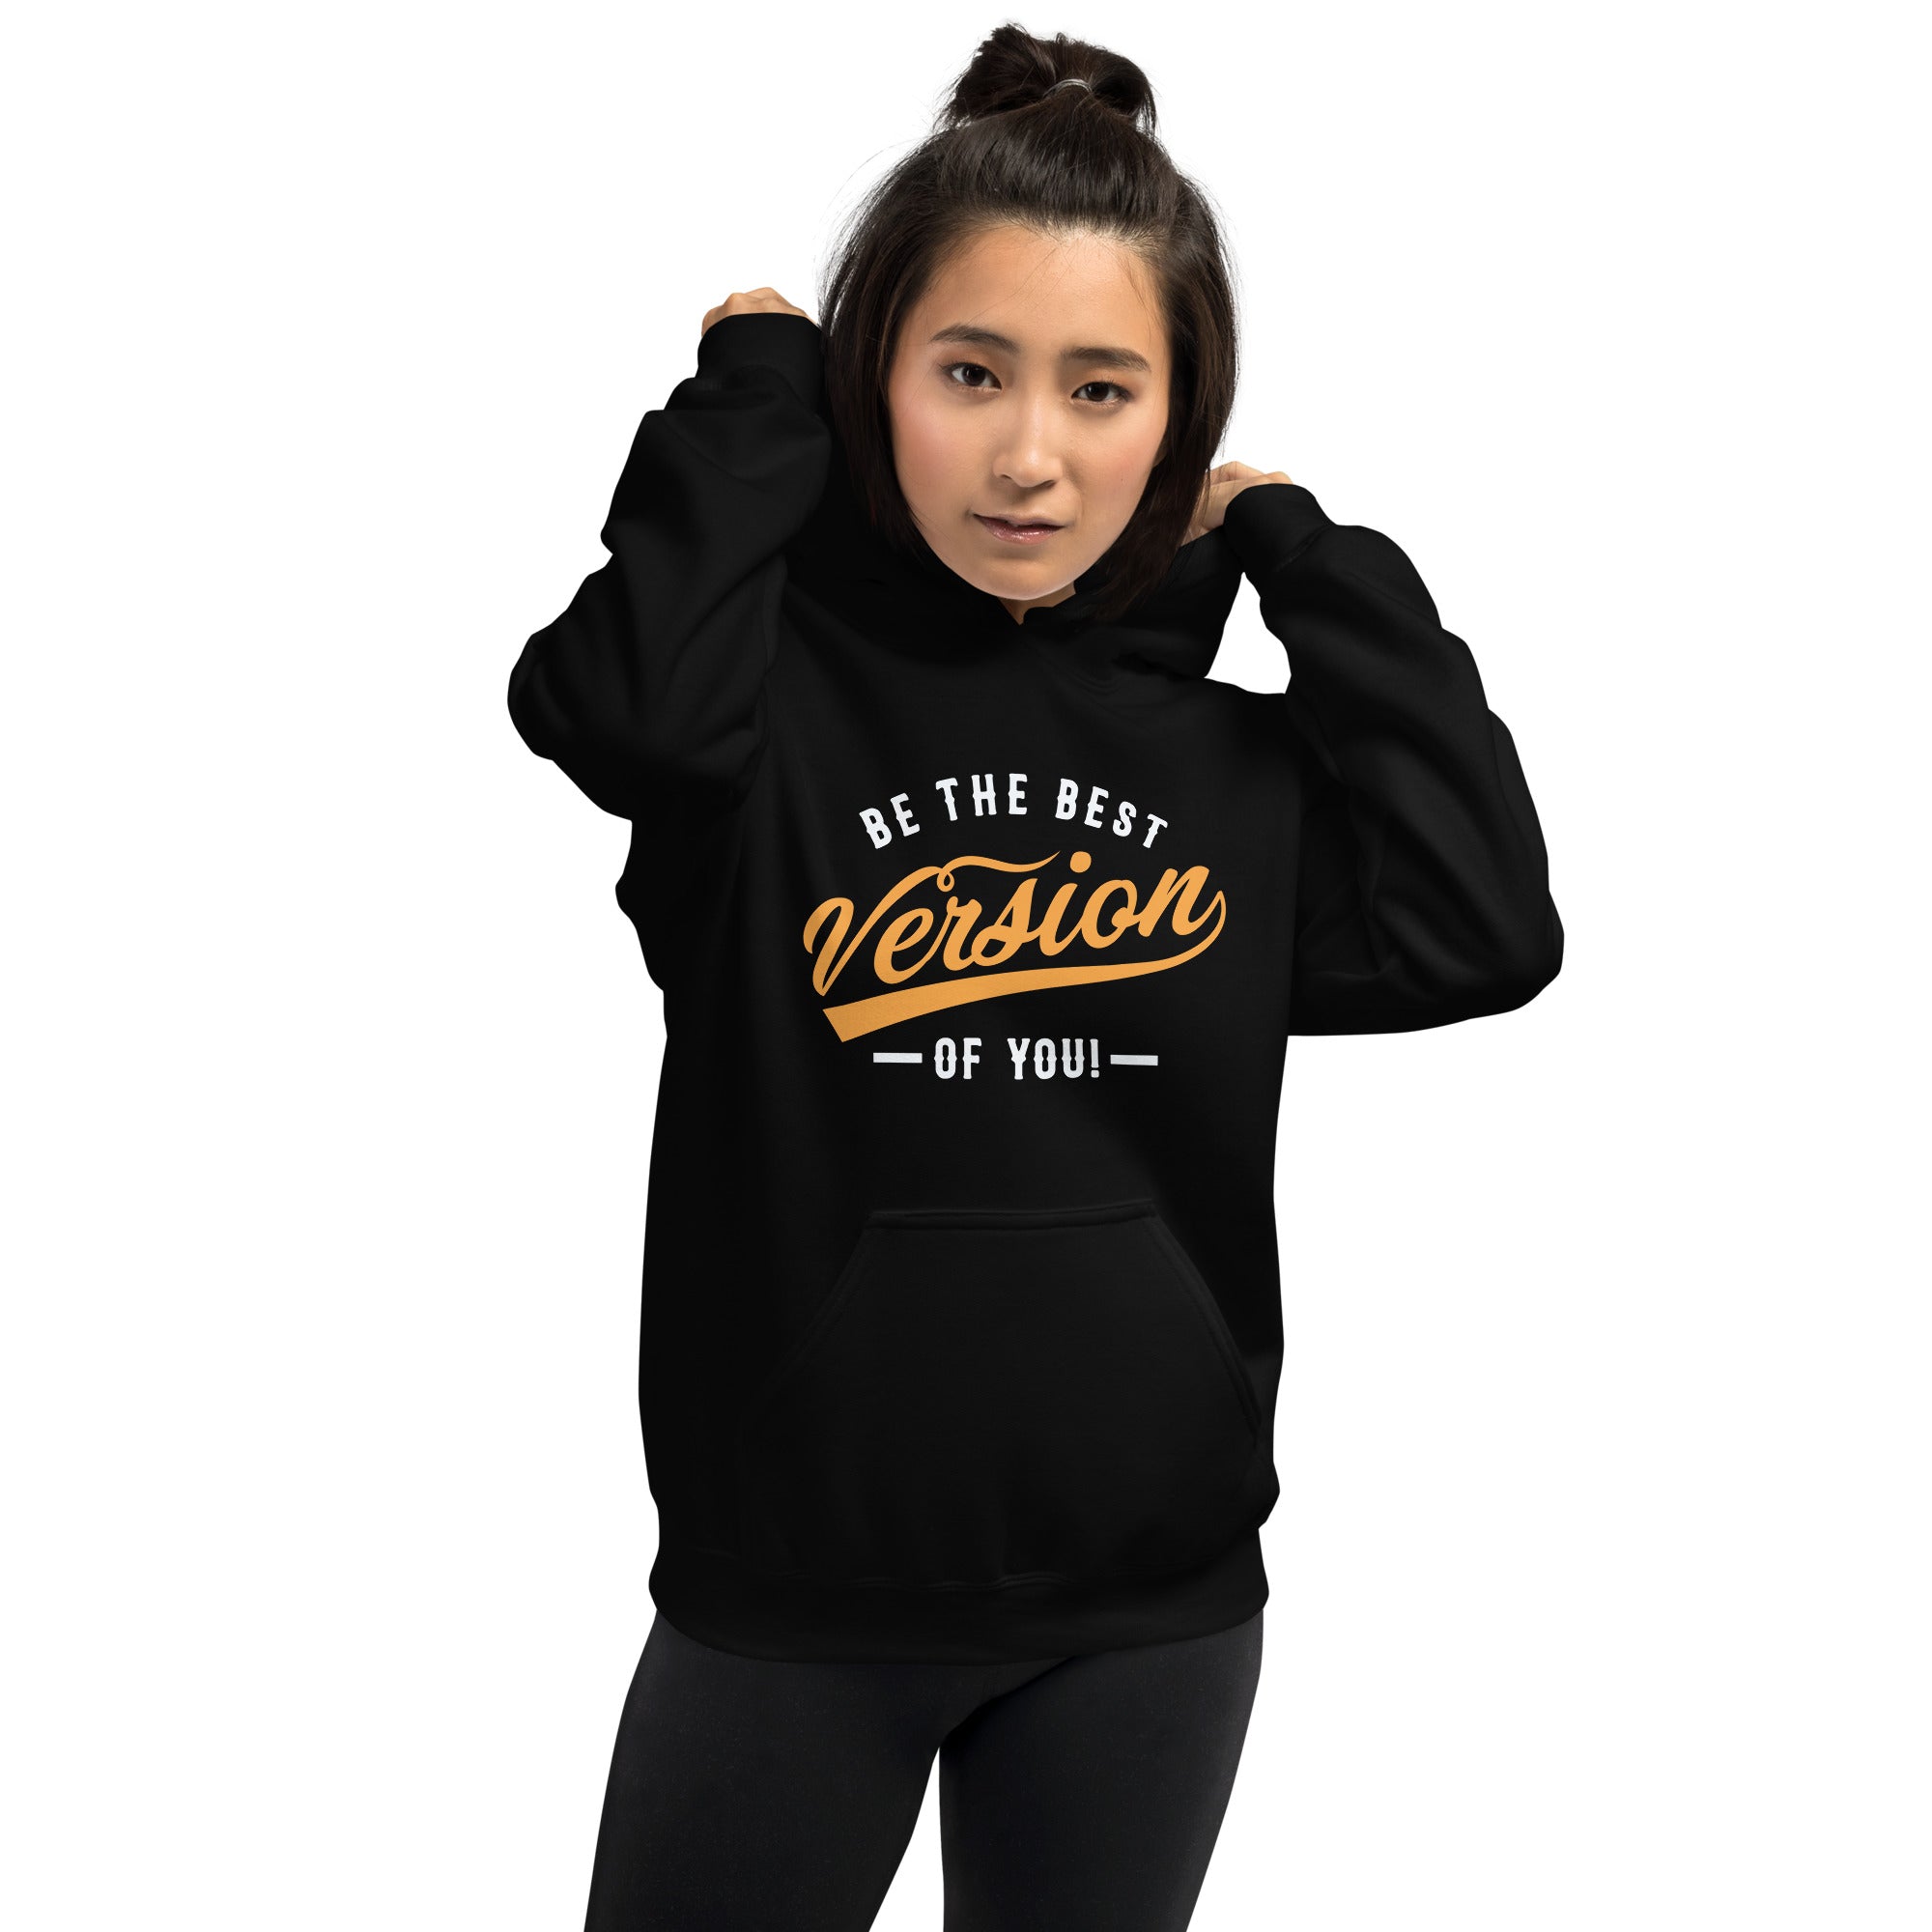 Be The Best Version of You - Unisex Hoodie